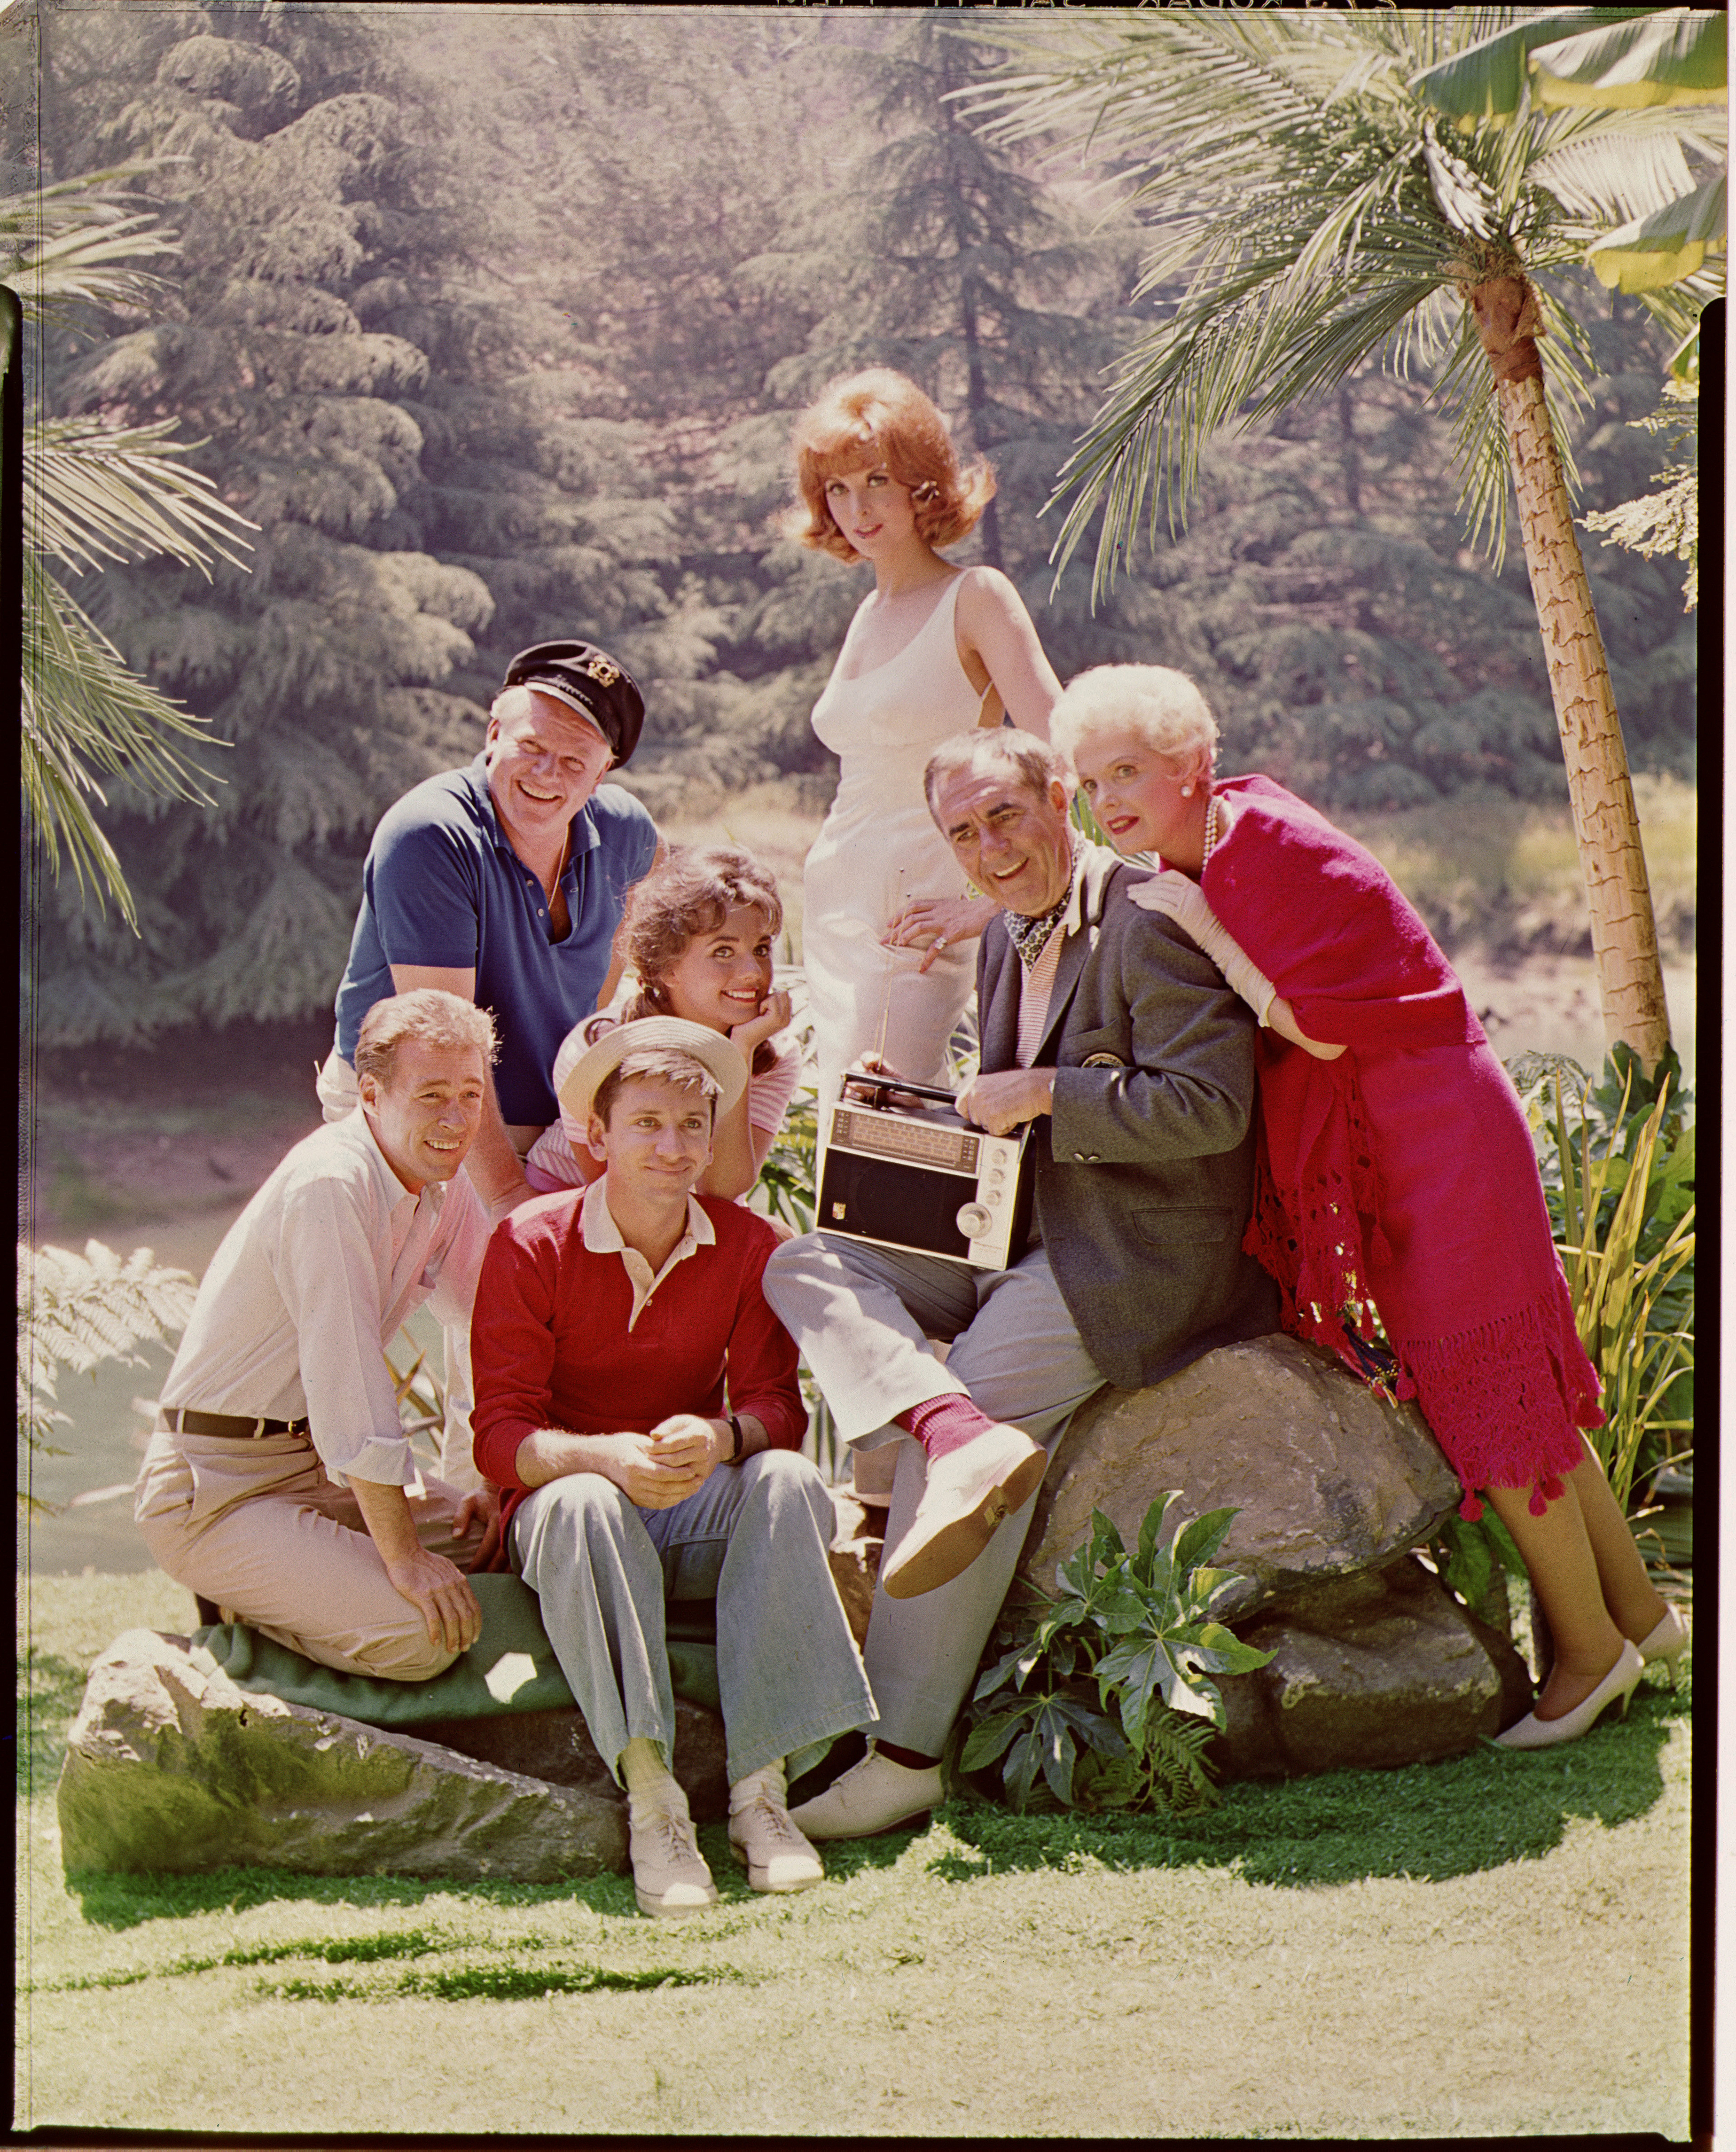 A promotional portrait of the "Gilligan's Island" cast Russell Johnson, Alan Hale Jr., Bob Denver, Dawn Wells, Tina Louise, Jim Backus, and Natalie Schafer in 1963 | Source: Getty Images